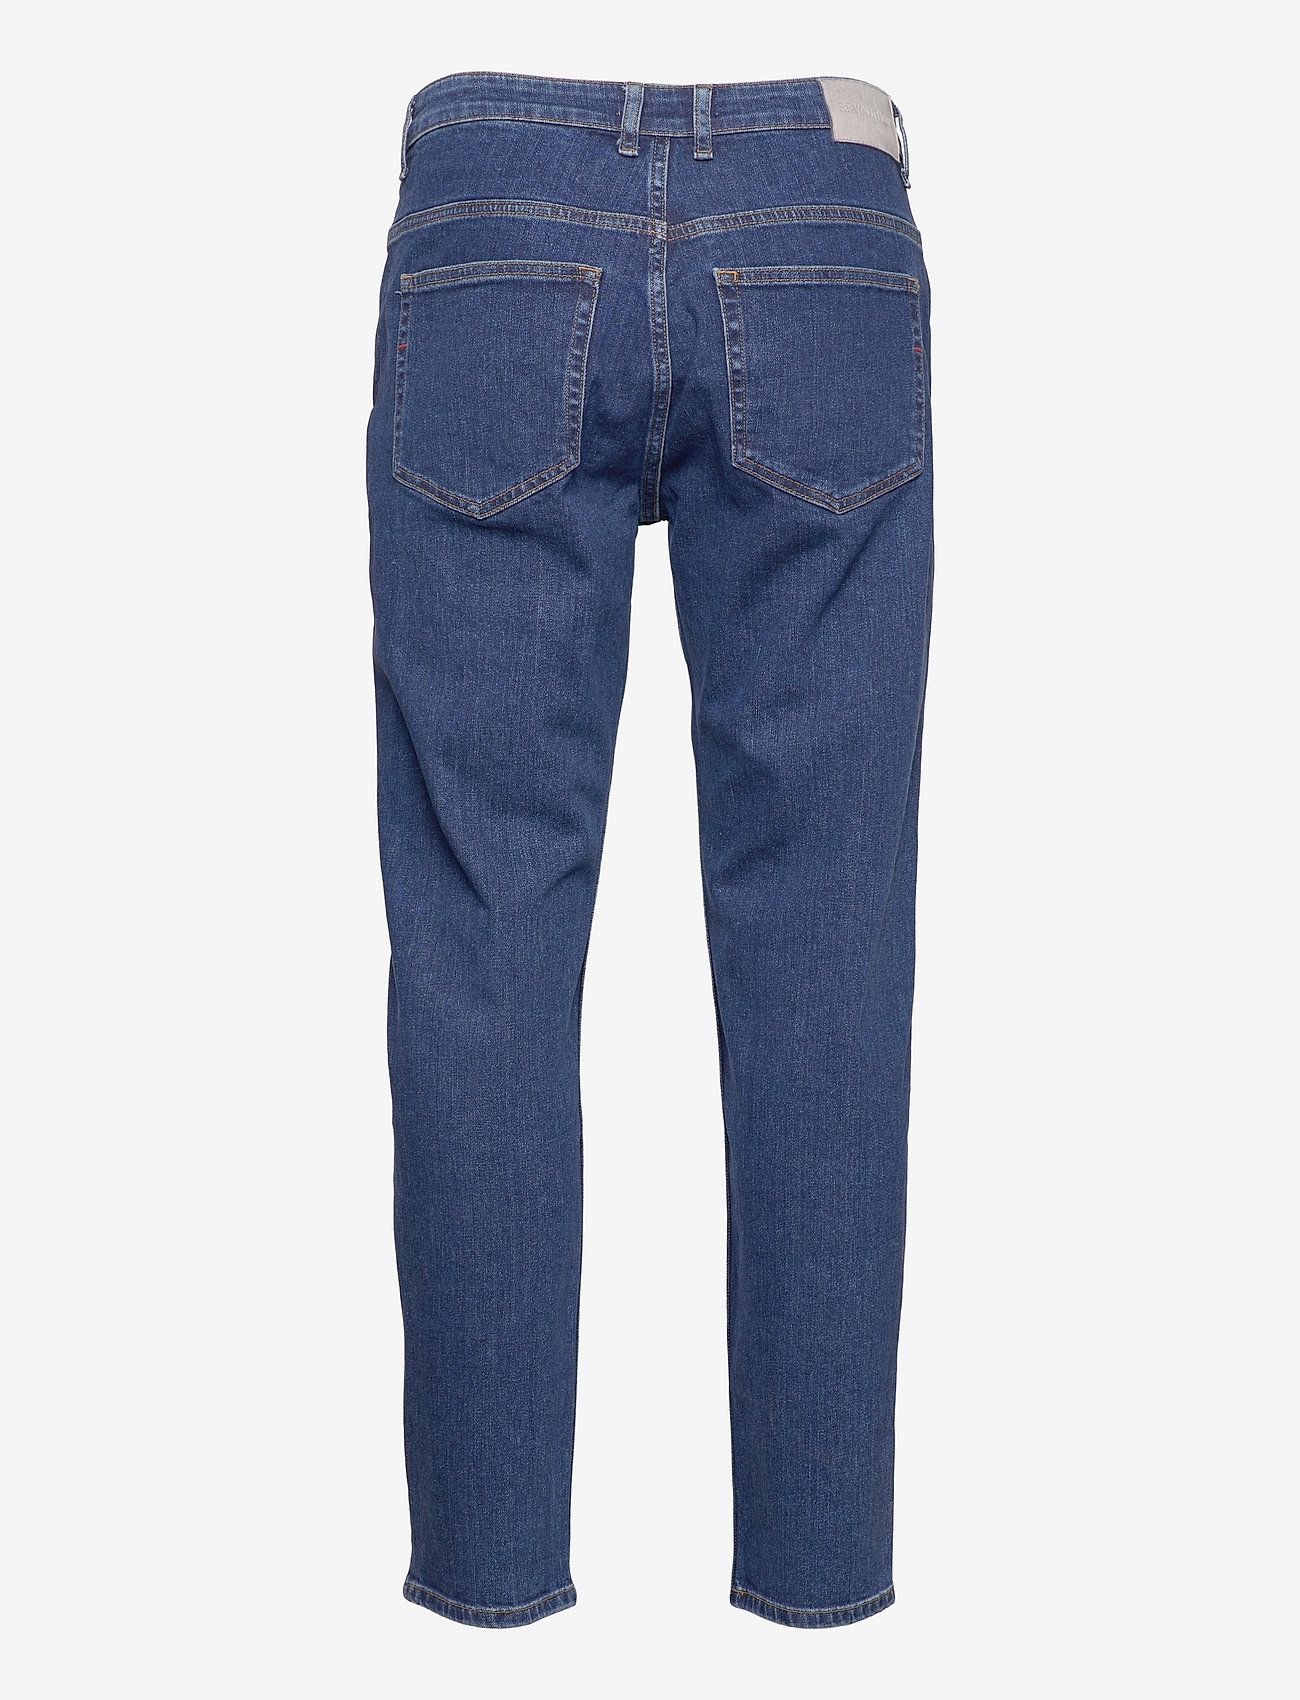 Revolution - Rinsed blue loose jeans - relaxed jeans - blue - 1